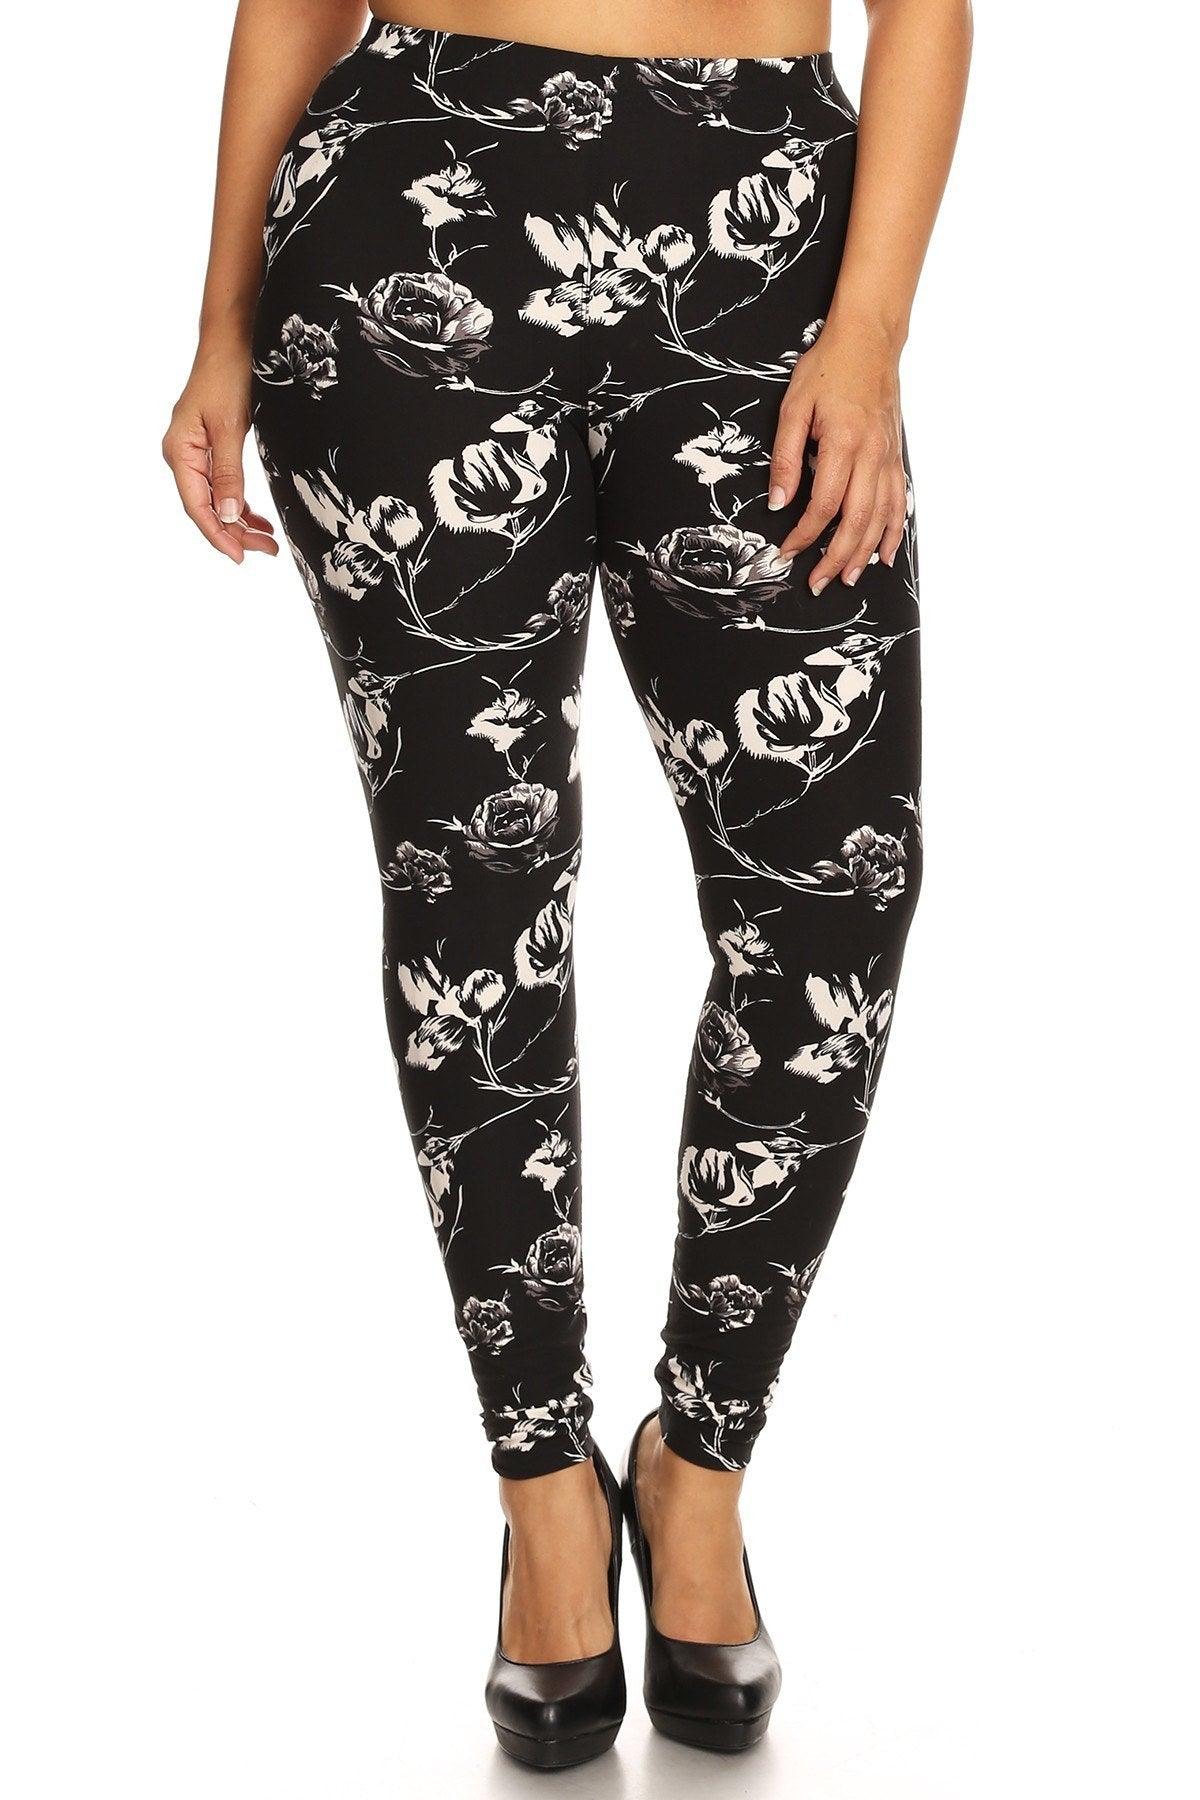 Plus Size Abstract Print, Full Length Leggings In A Slim Fitting Style With A Banded High Waist - Kreative Passions